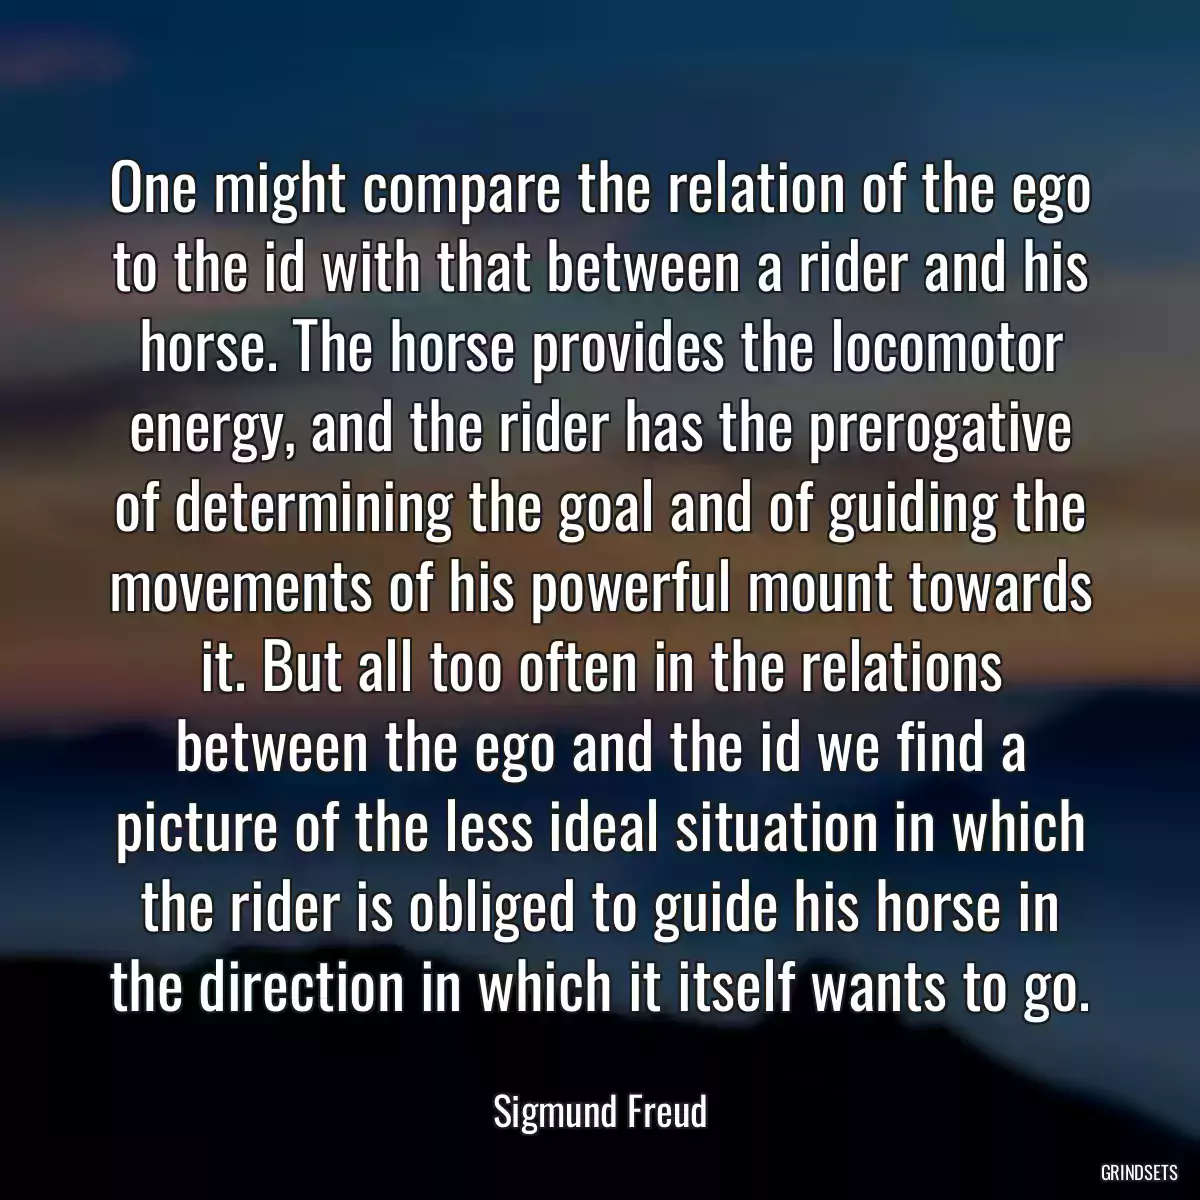 One might compare the relation of the ego to the id with that between a rider and his horse. The horse provides the locomotor energy, and the rider has the prerogative of determining the goal and of guiding the movements of his powerful mount towards it. But all too often in the relations between the ego and the id we find a picture of the less ideal situation in which the rider is obliged to guide his horse in the direction in which it itself wants to go.